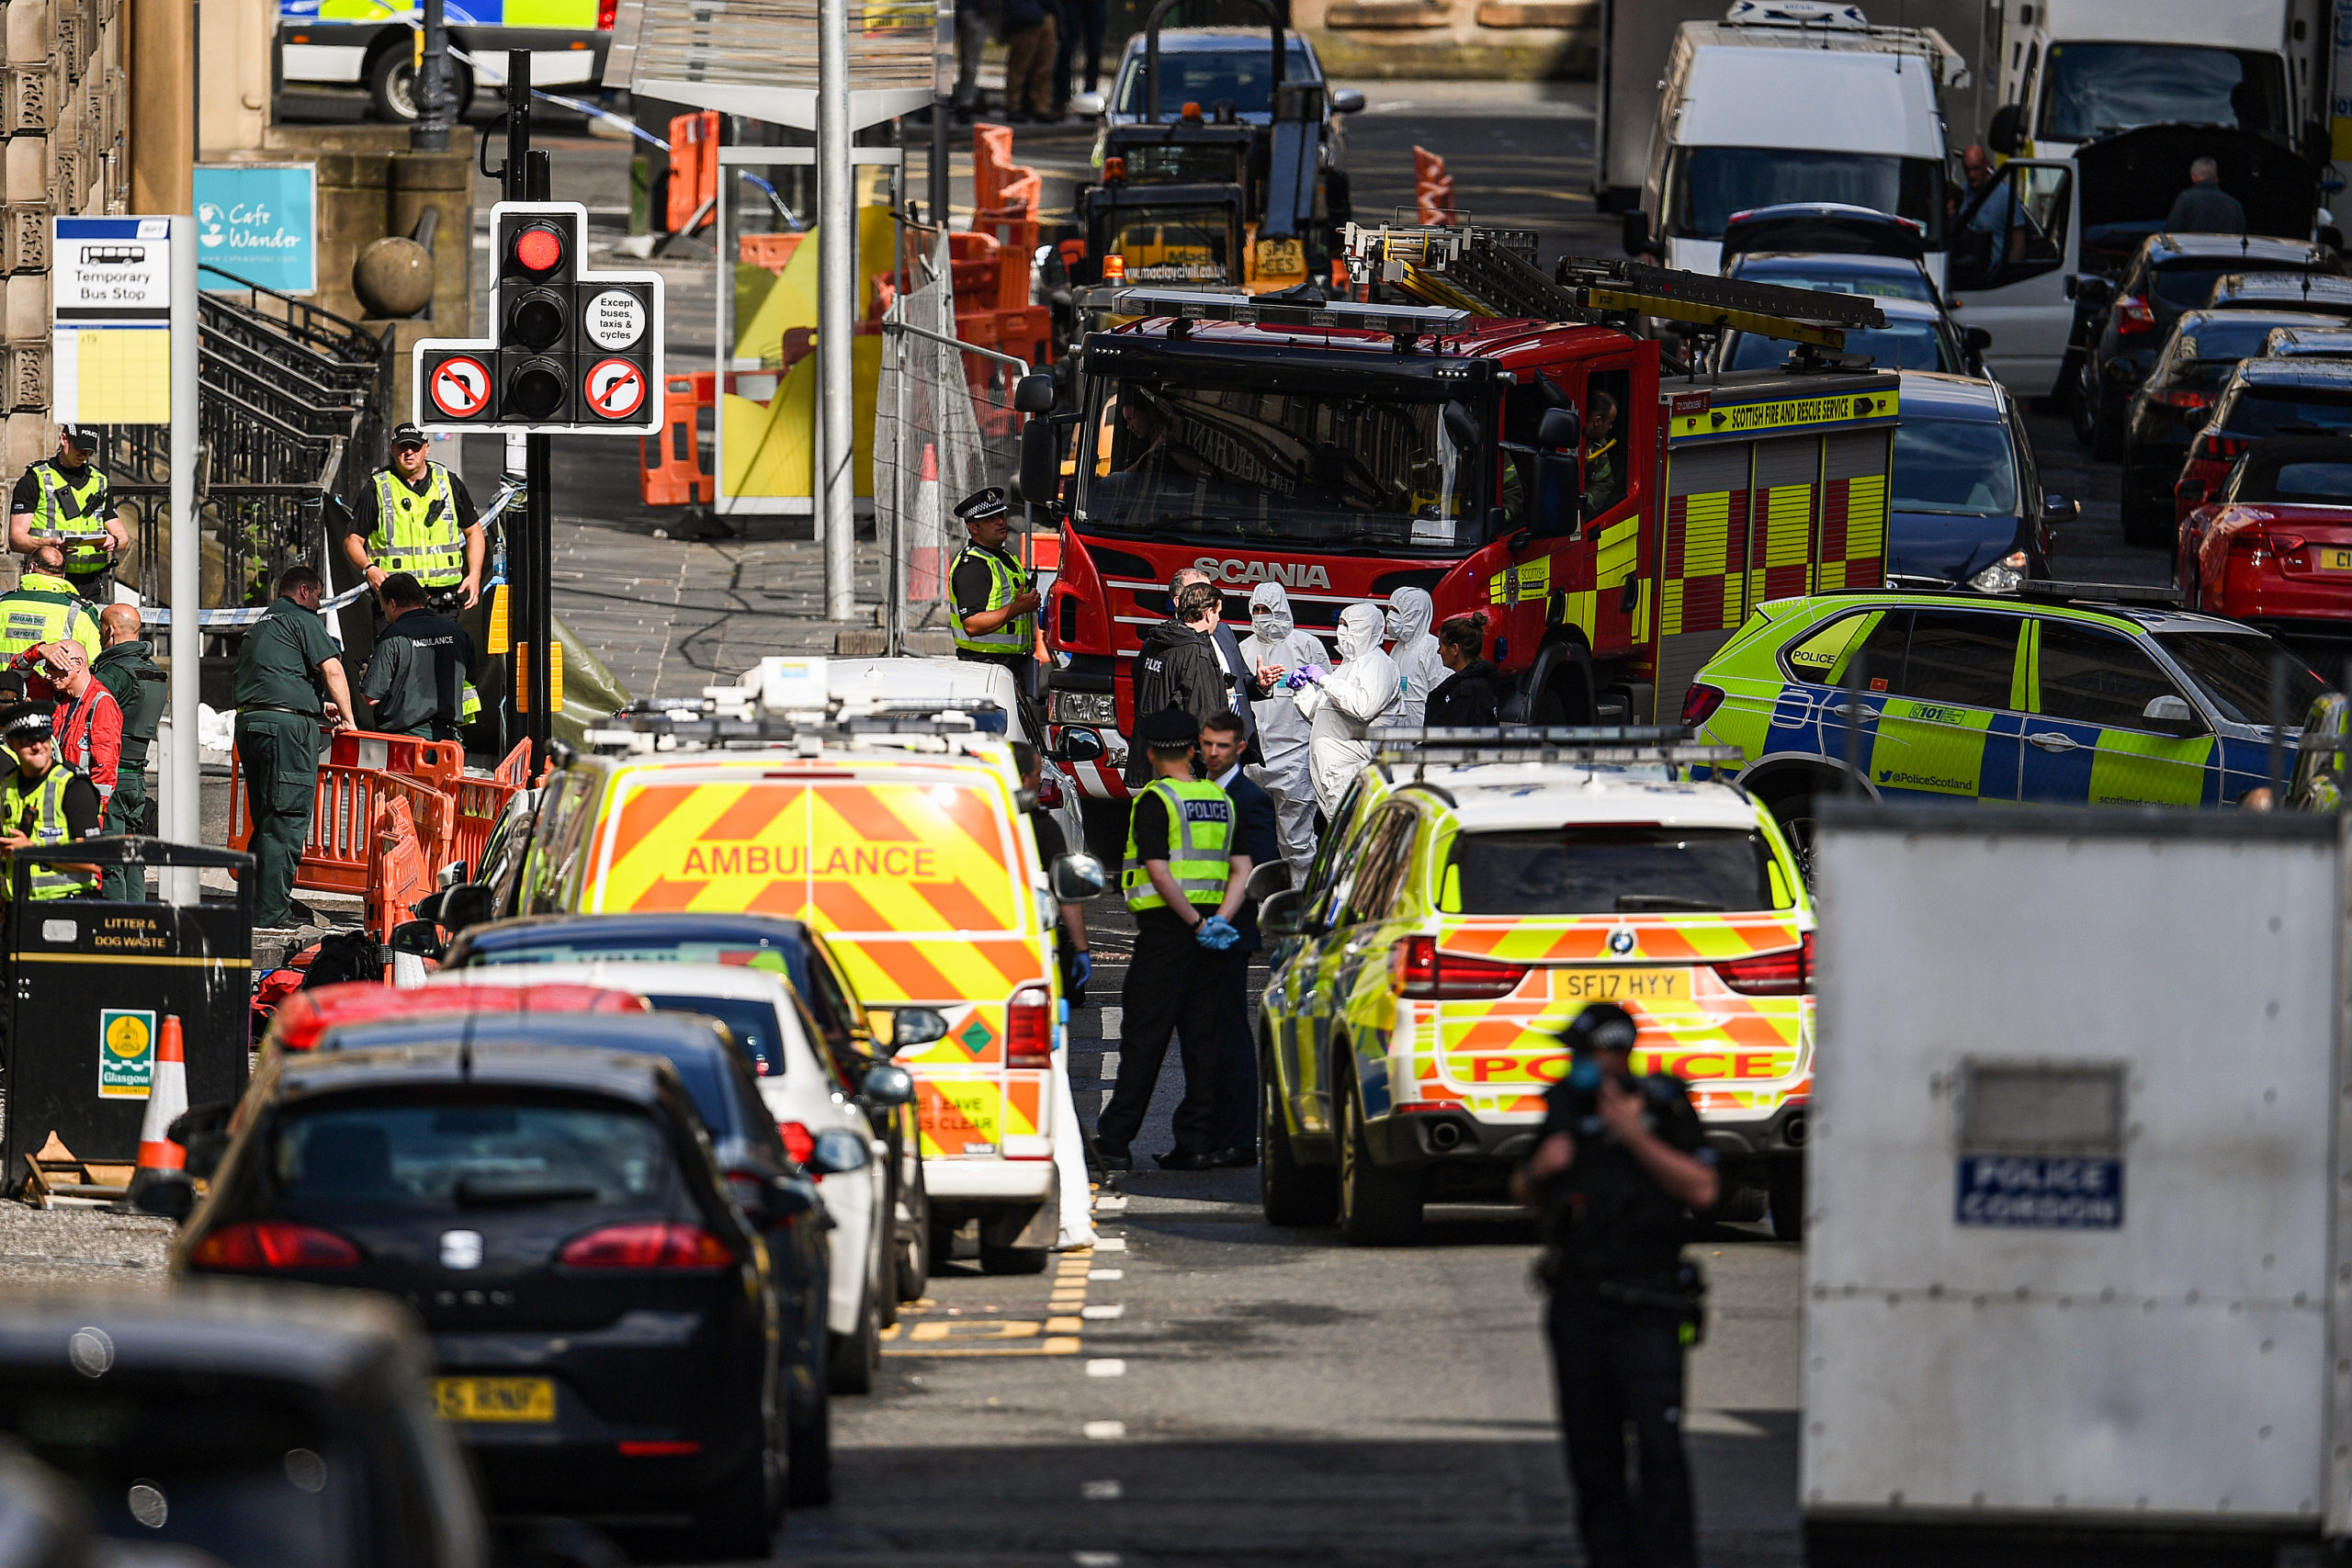 Police officers attend the scene after reports of three people being stabbed in a central Glasgow hotel on June 26, 2020.